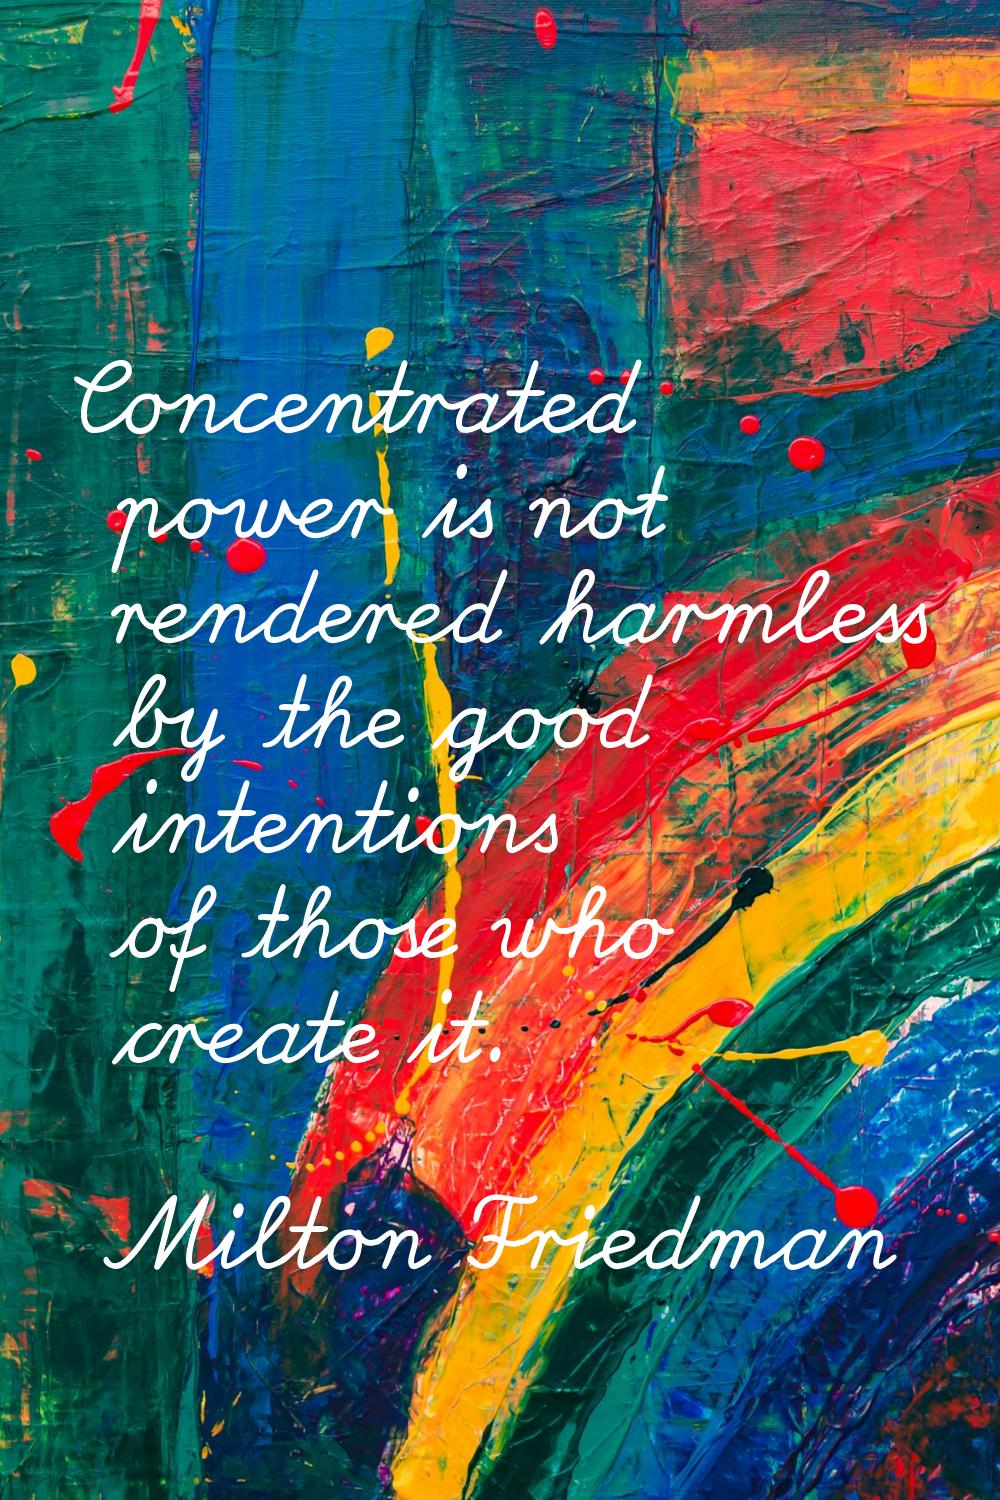 Concentrated power is not rendered harmless by the good intentions of those who create it.